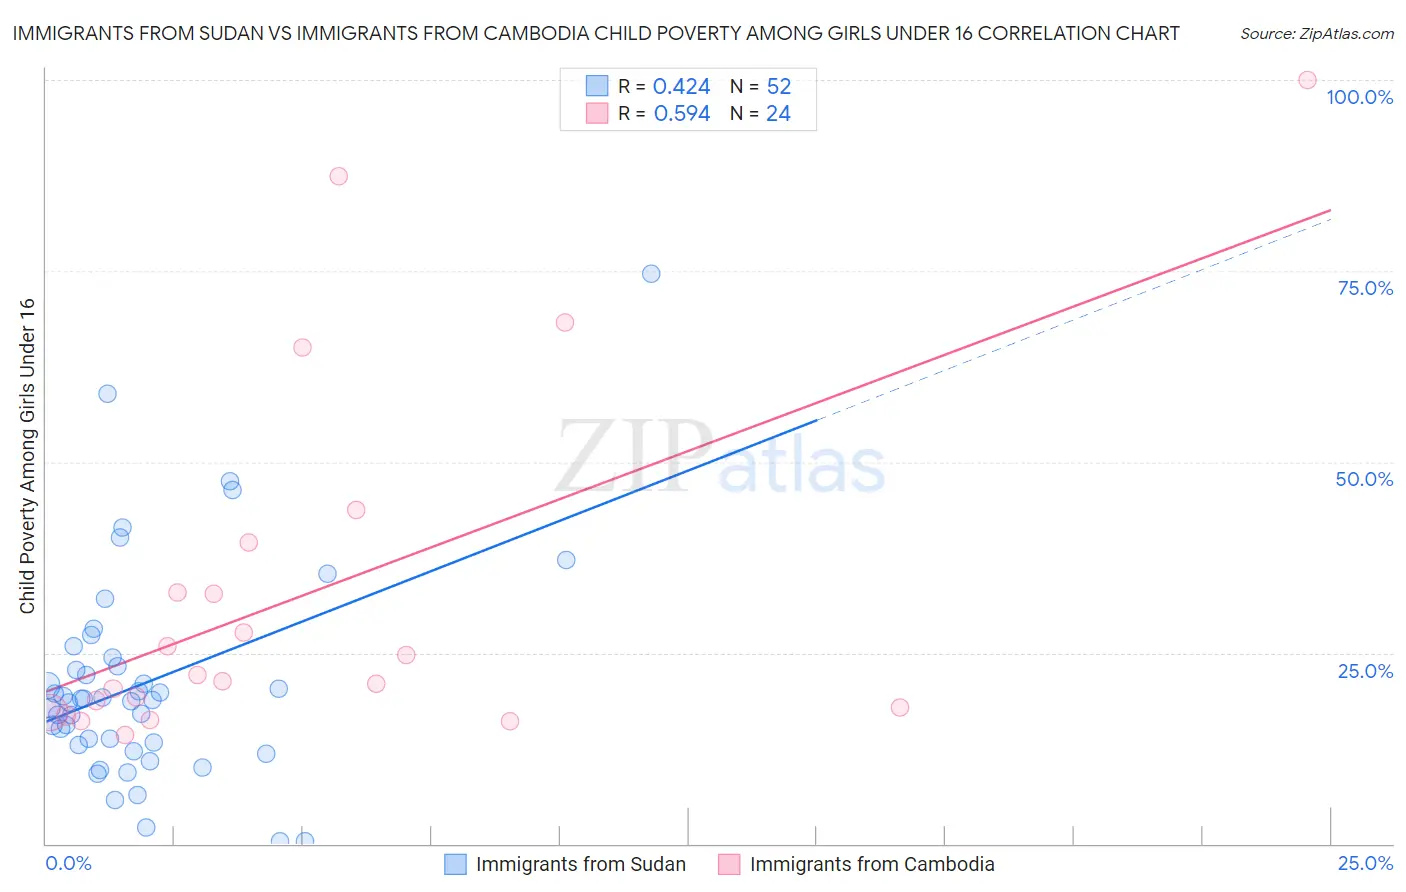 Immigrants from Sudan vs Immigrants from Cambodia Child Poverty Among Girls Under 16